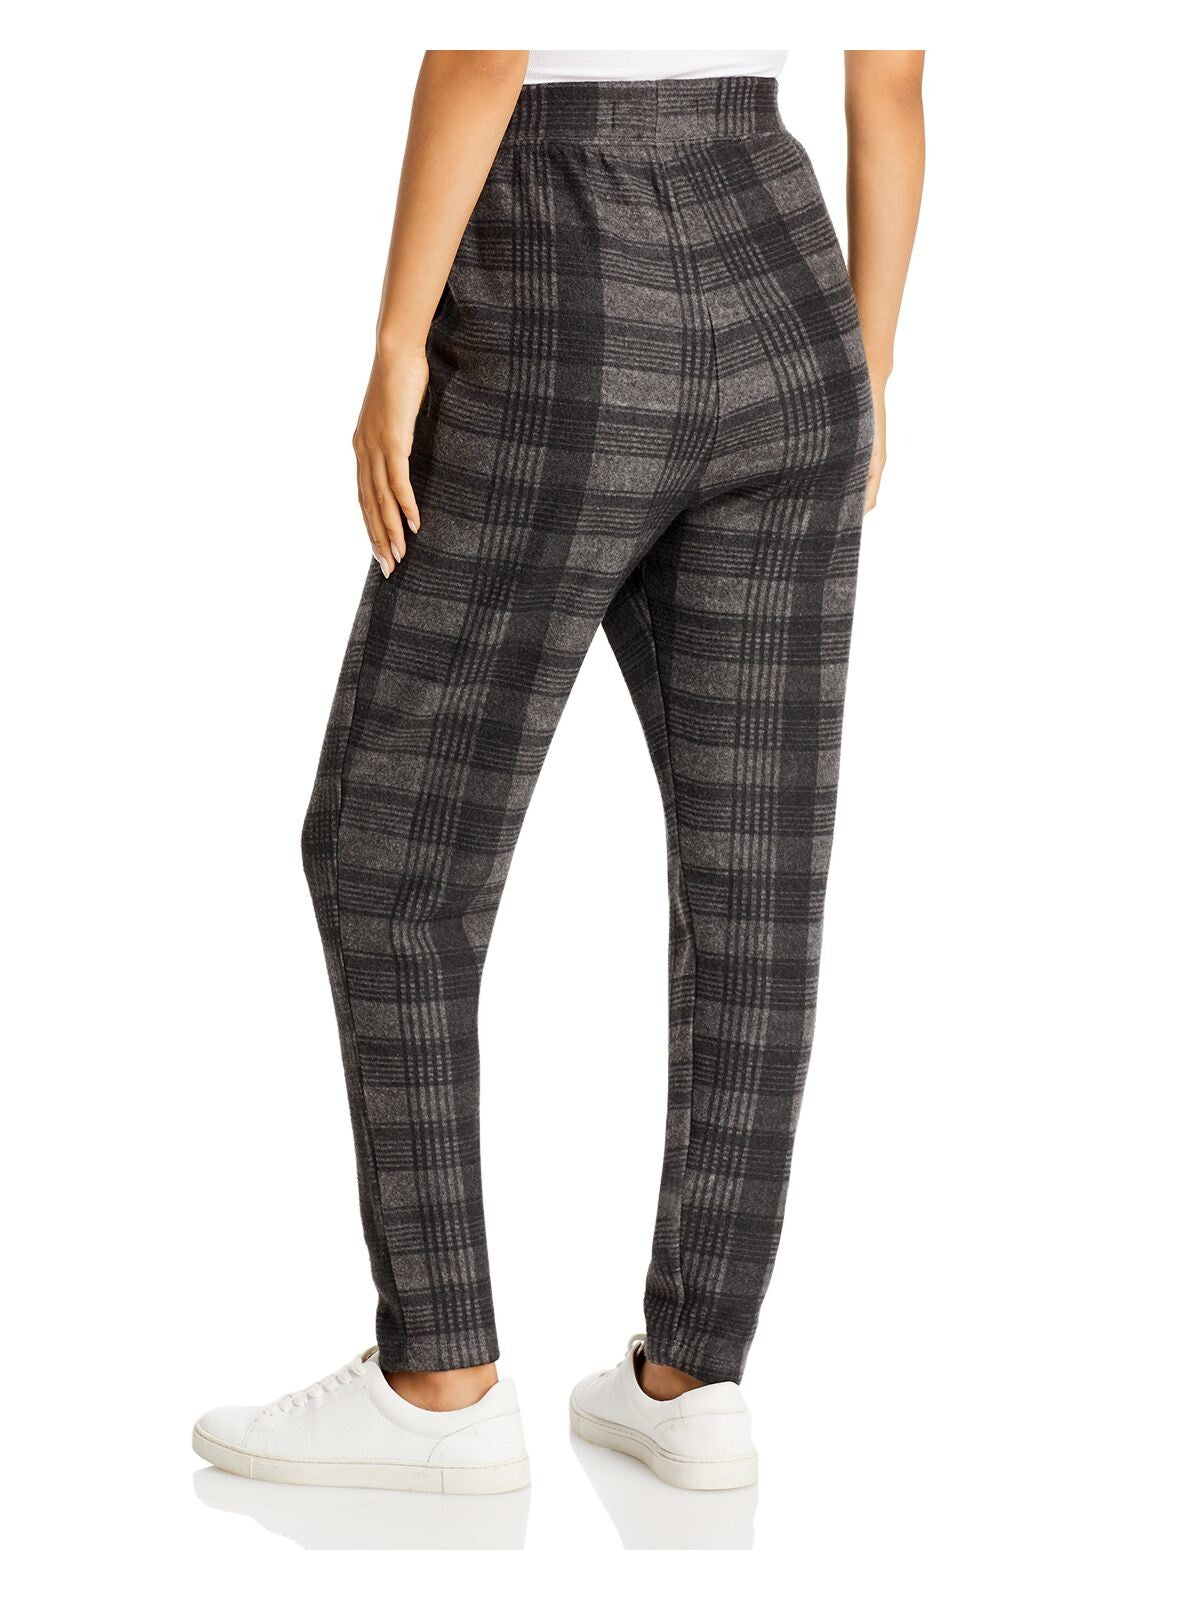 SOL ANGELES Womens Gray Fleece Pocketed Pleated Pull On Plaid Pants S